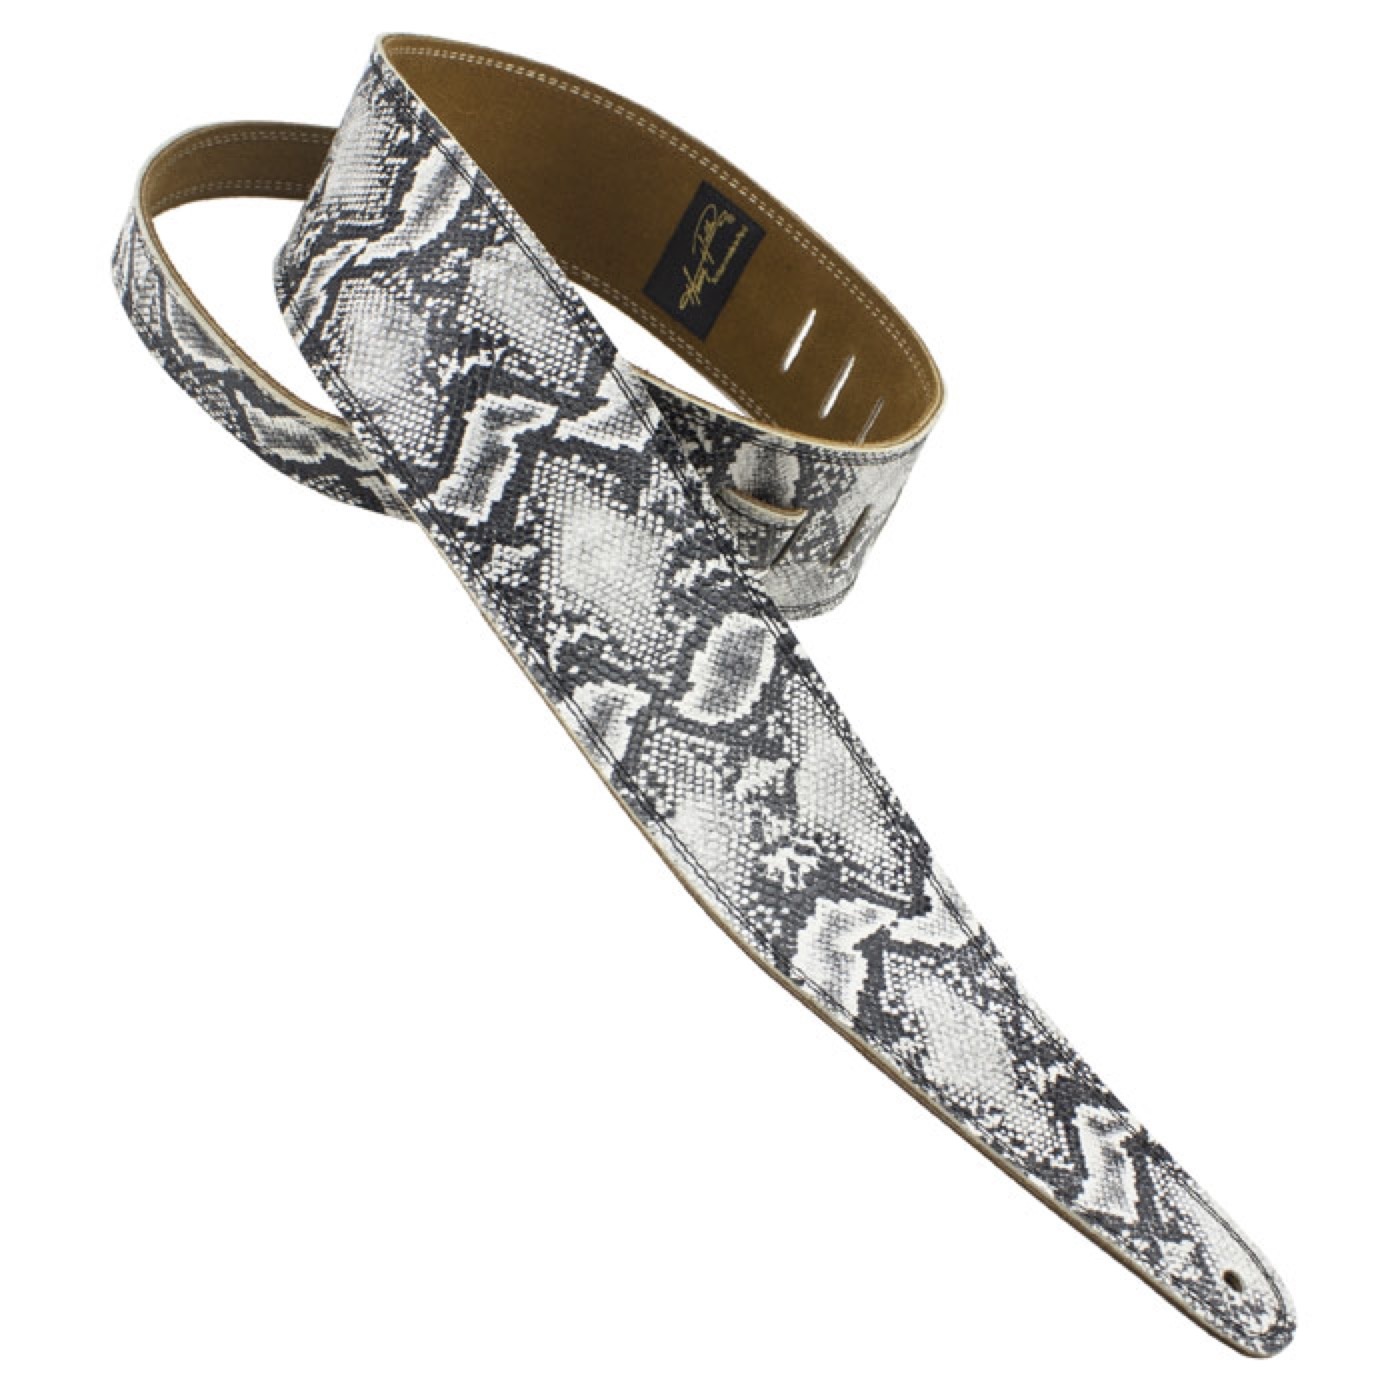 Henry Heller Peru Double Stitched Leather 2.5" Strap - Boa Snake Print w/ Velvety Sand Suede backing